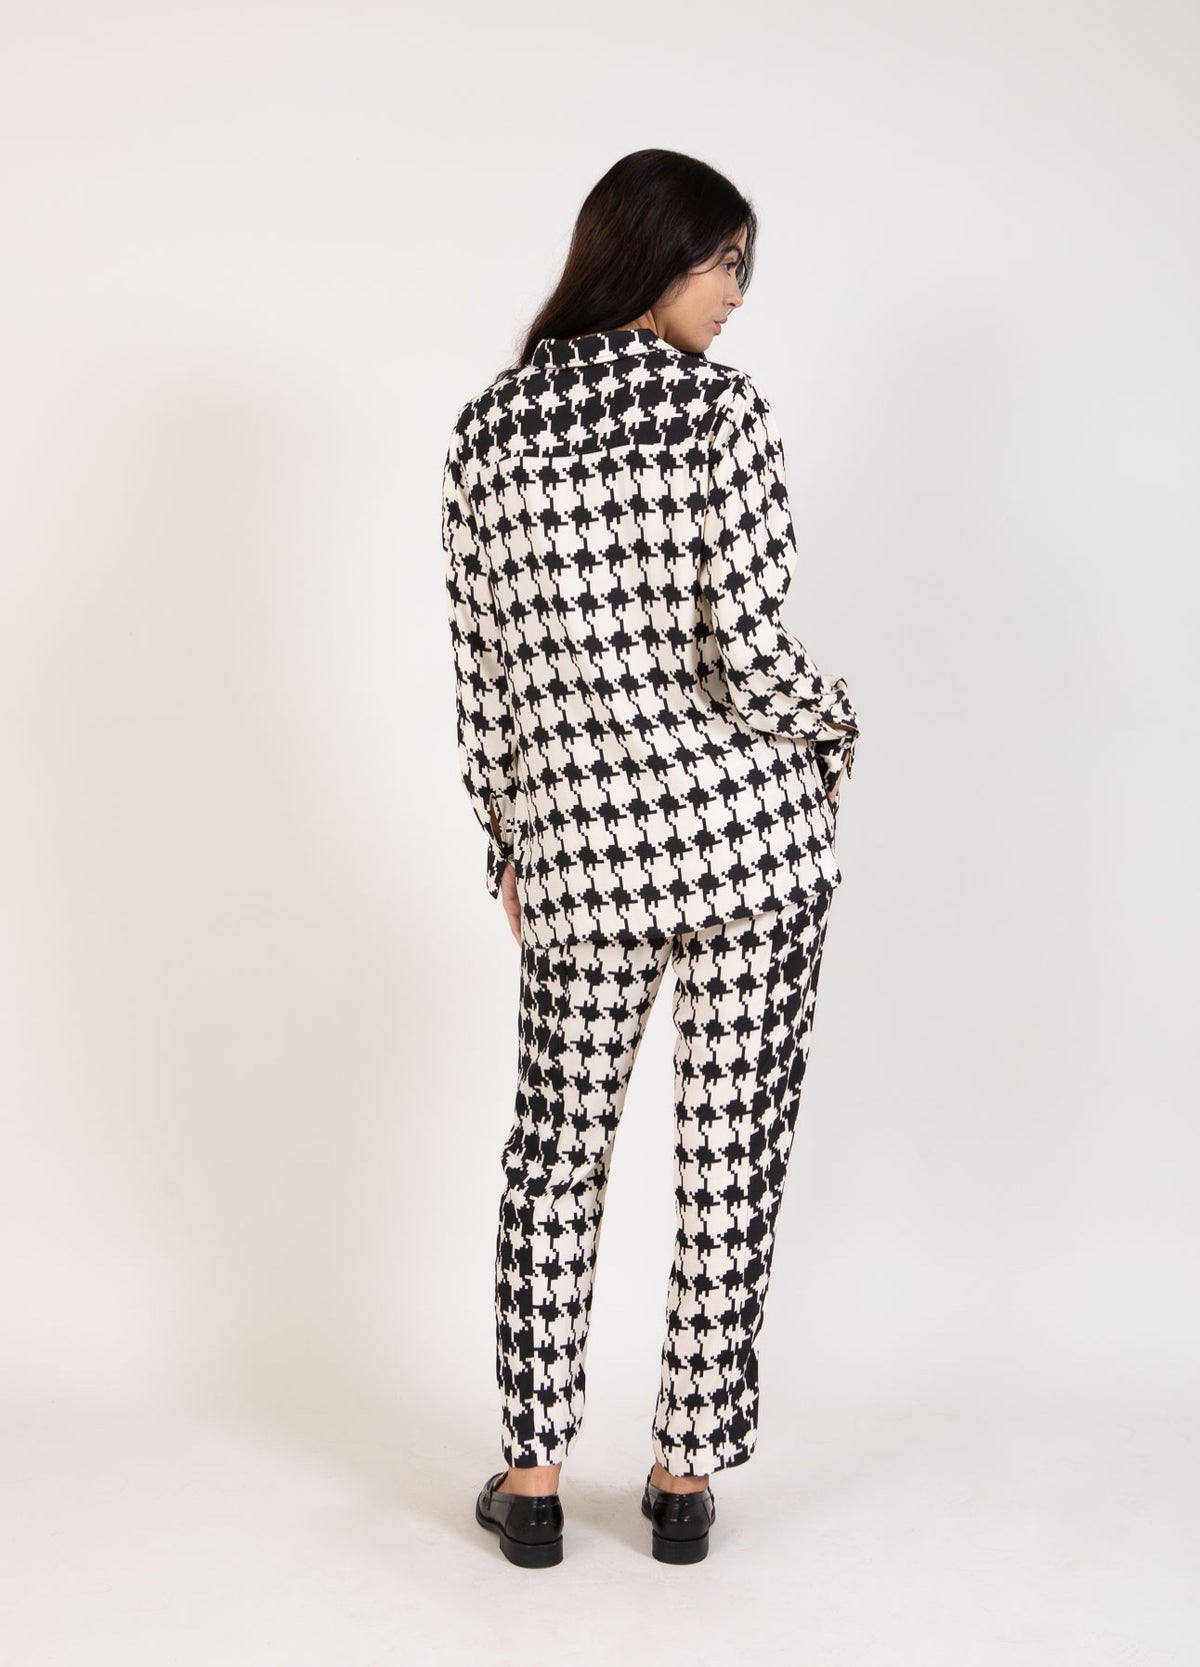 Houndstooth Black and Cream Trousers